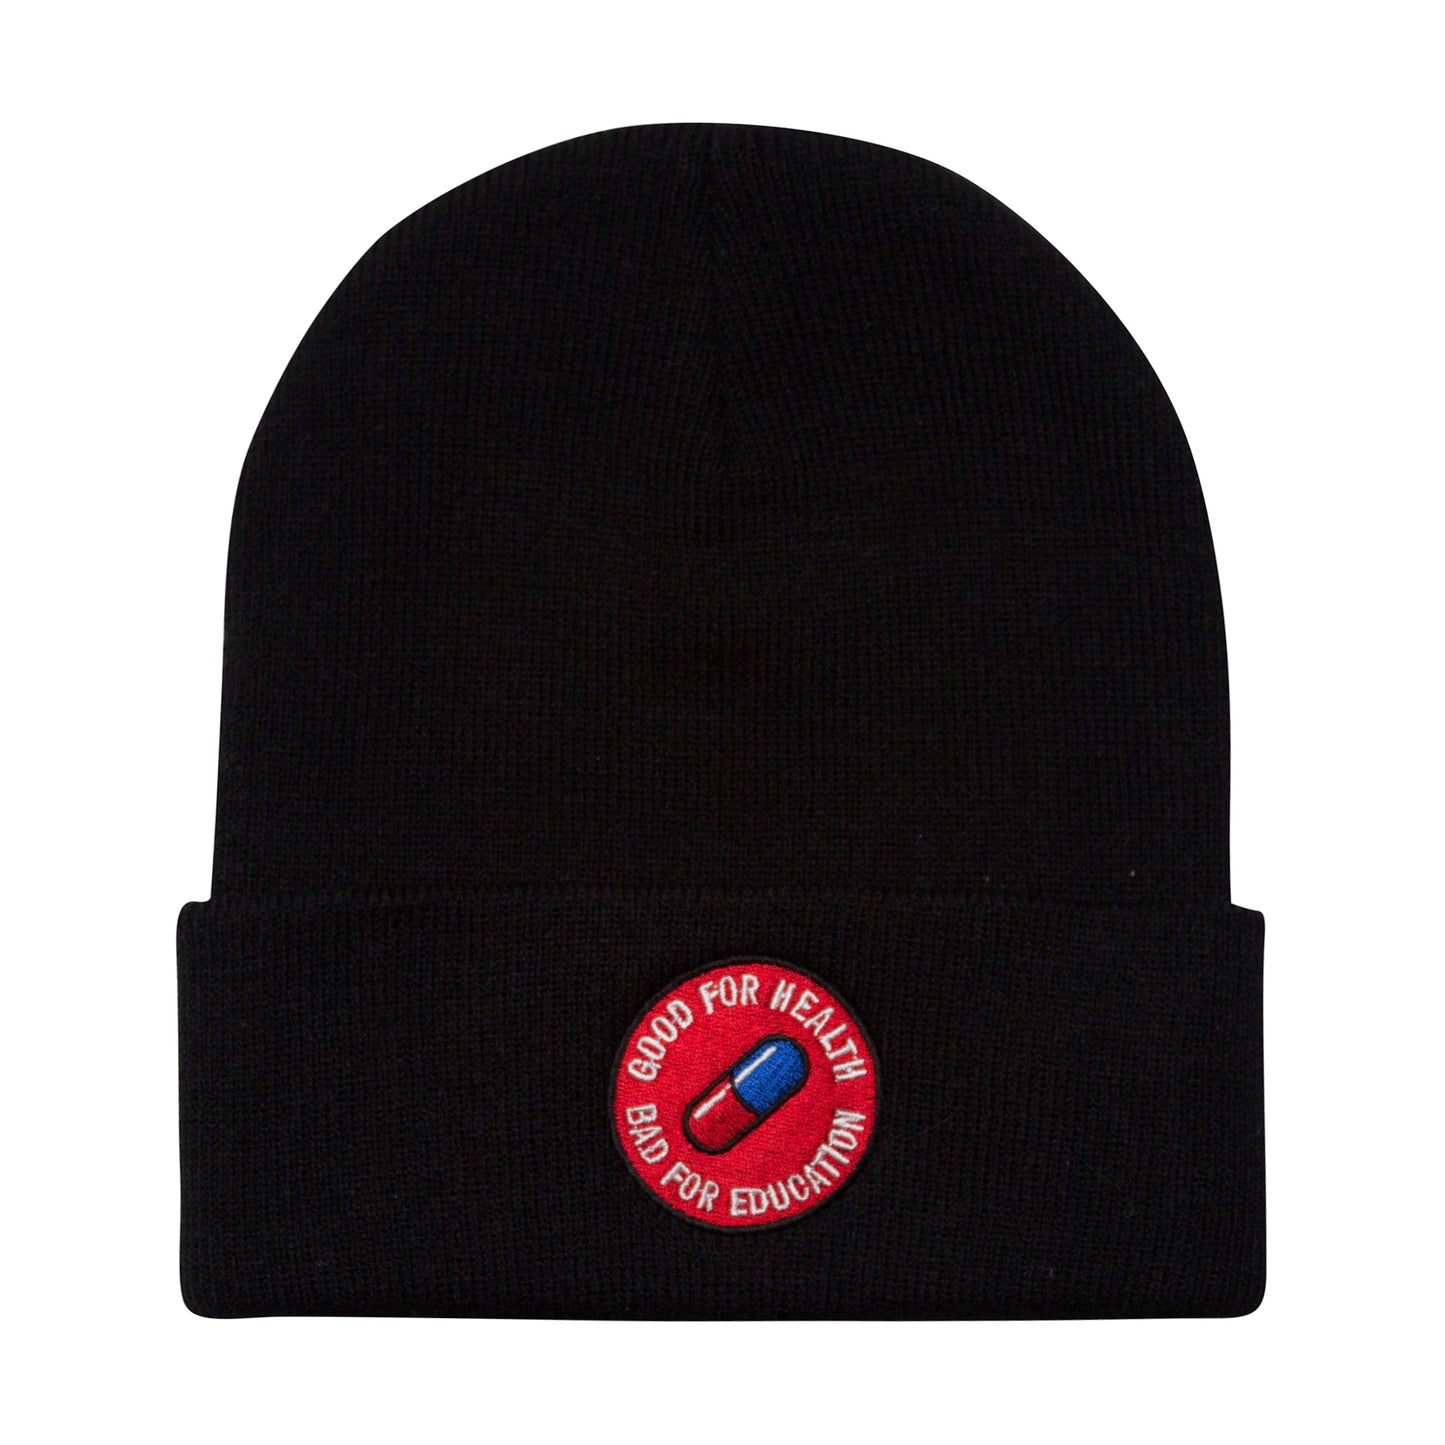 Bad For Education Beanie